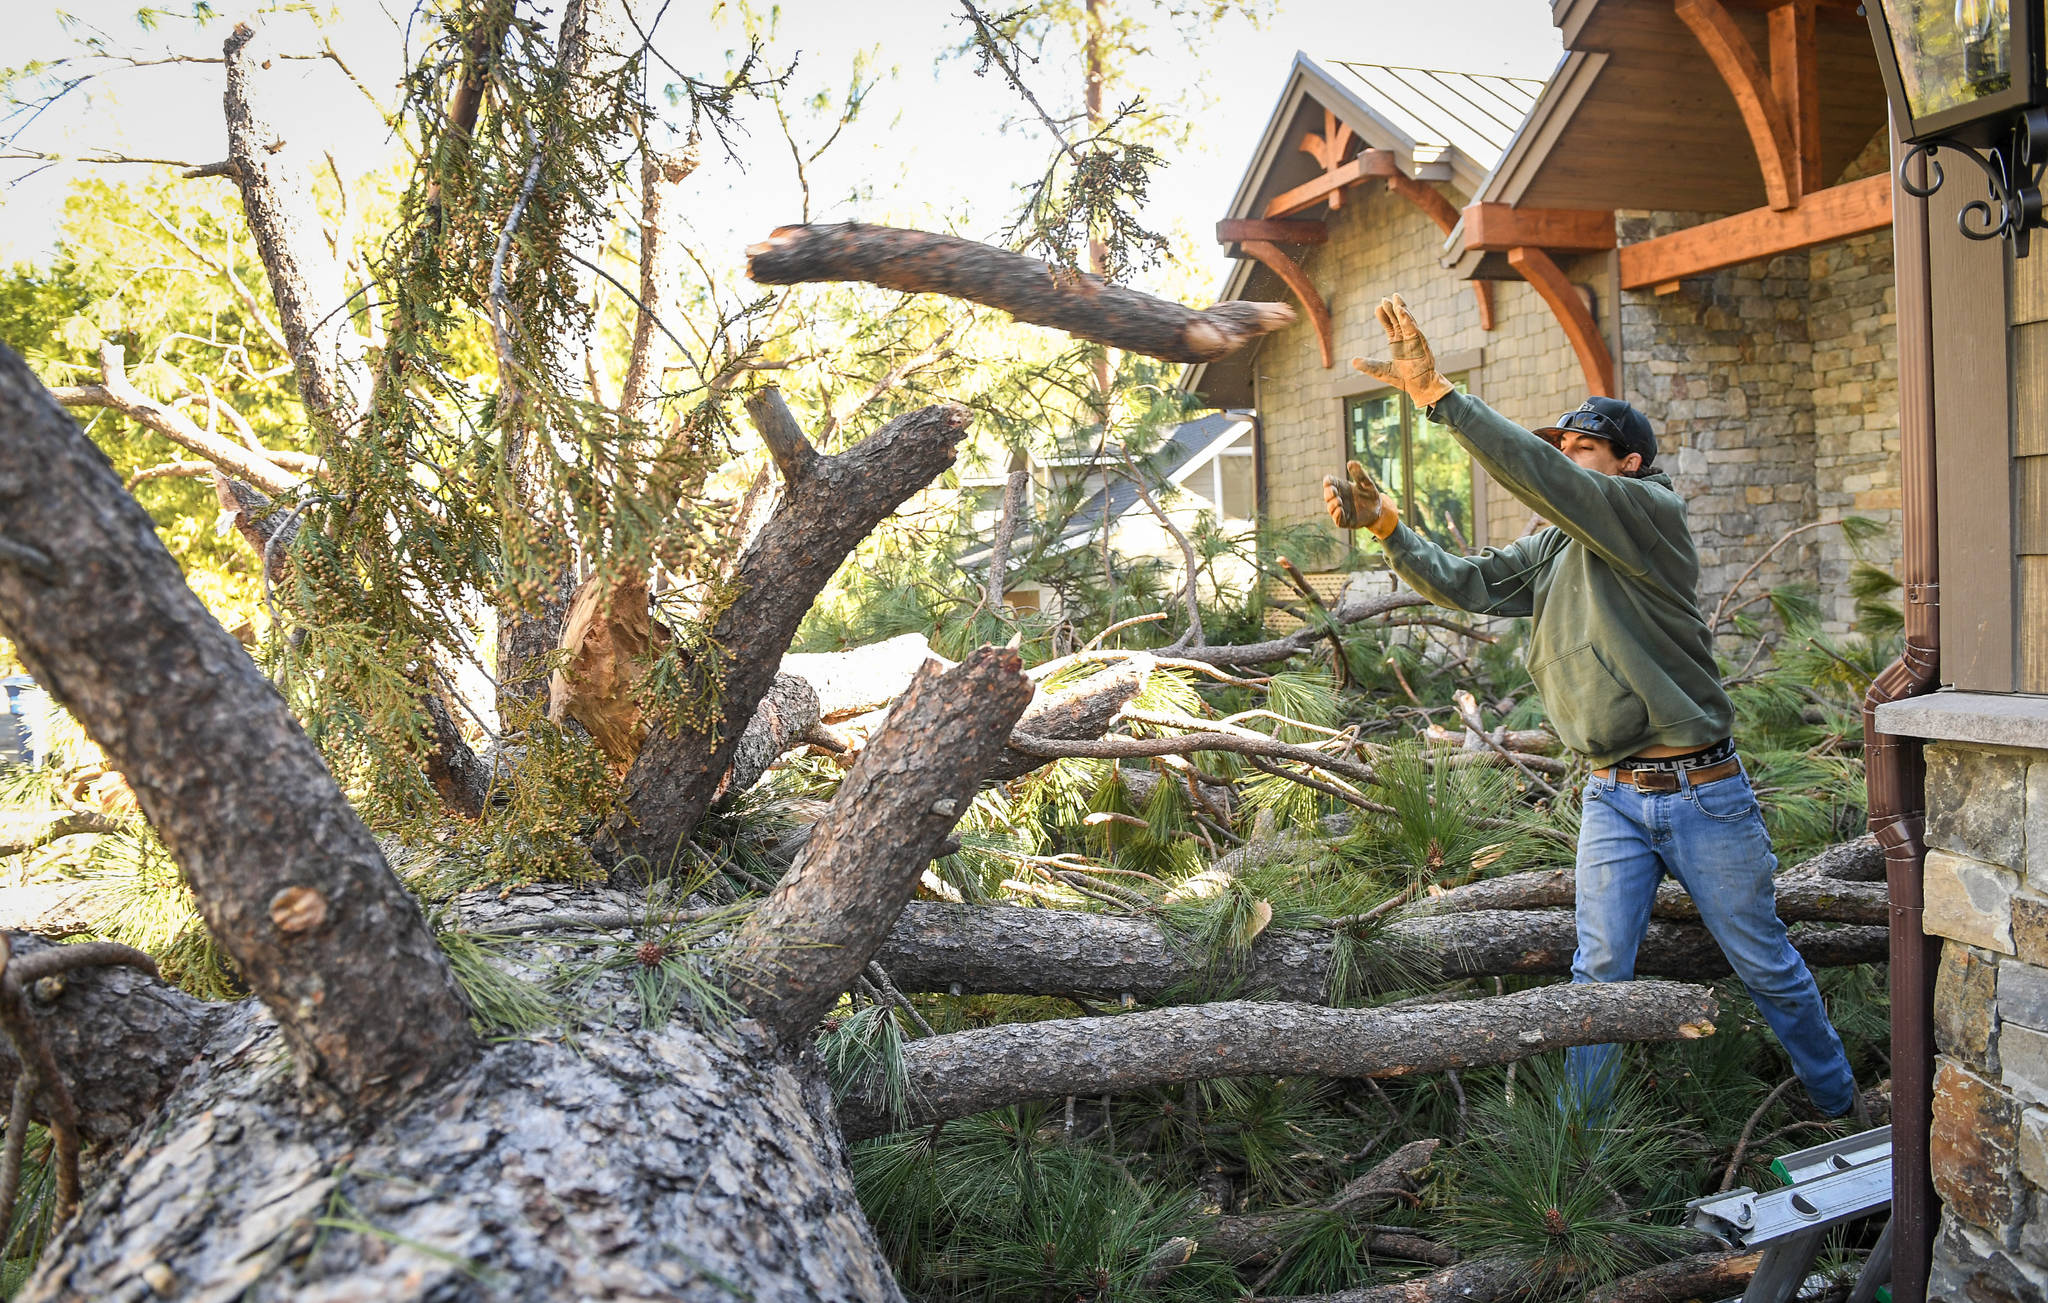 Craid Kohlruss/The Fresno Bee 
Contactor Tyler Papike helps clear a fallen ponderosa tree in front of a home he was working on in California’s Bass Lake area after strong winds rip through the area overnight on January 19, 2021.